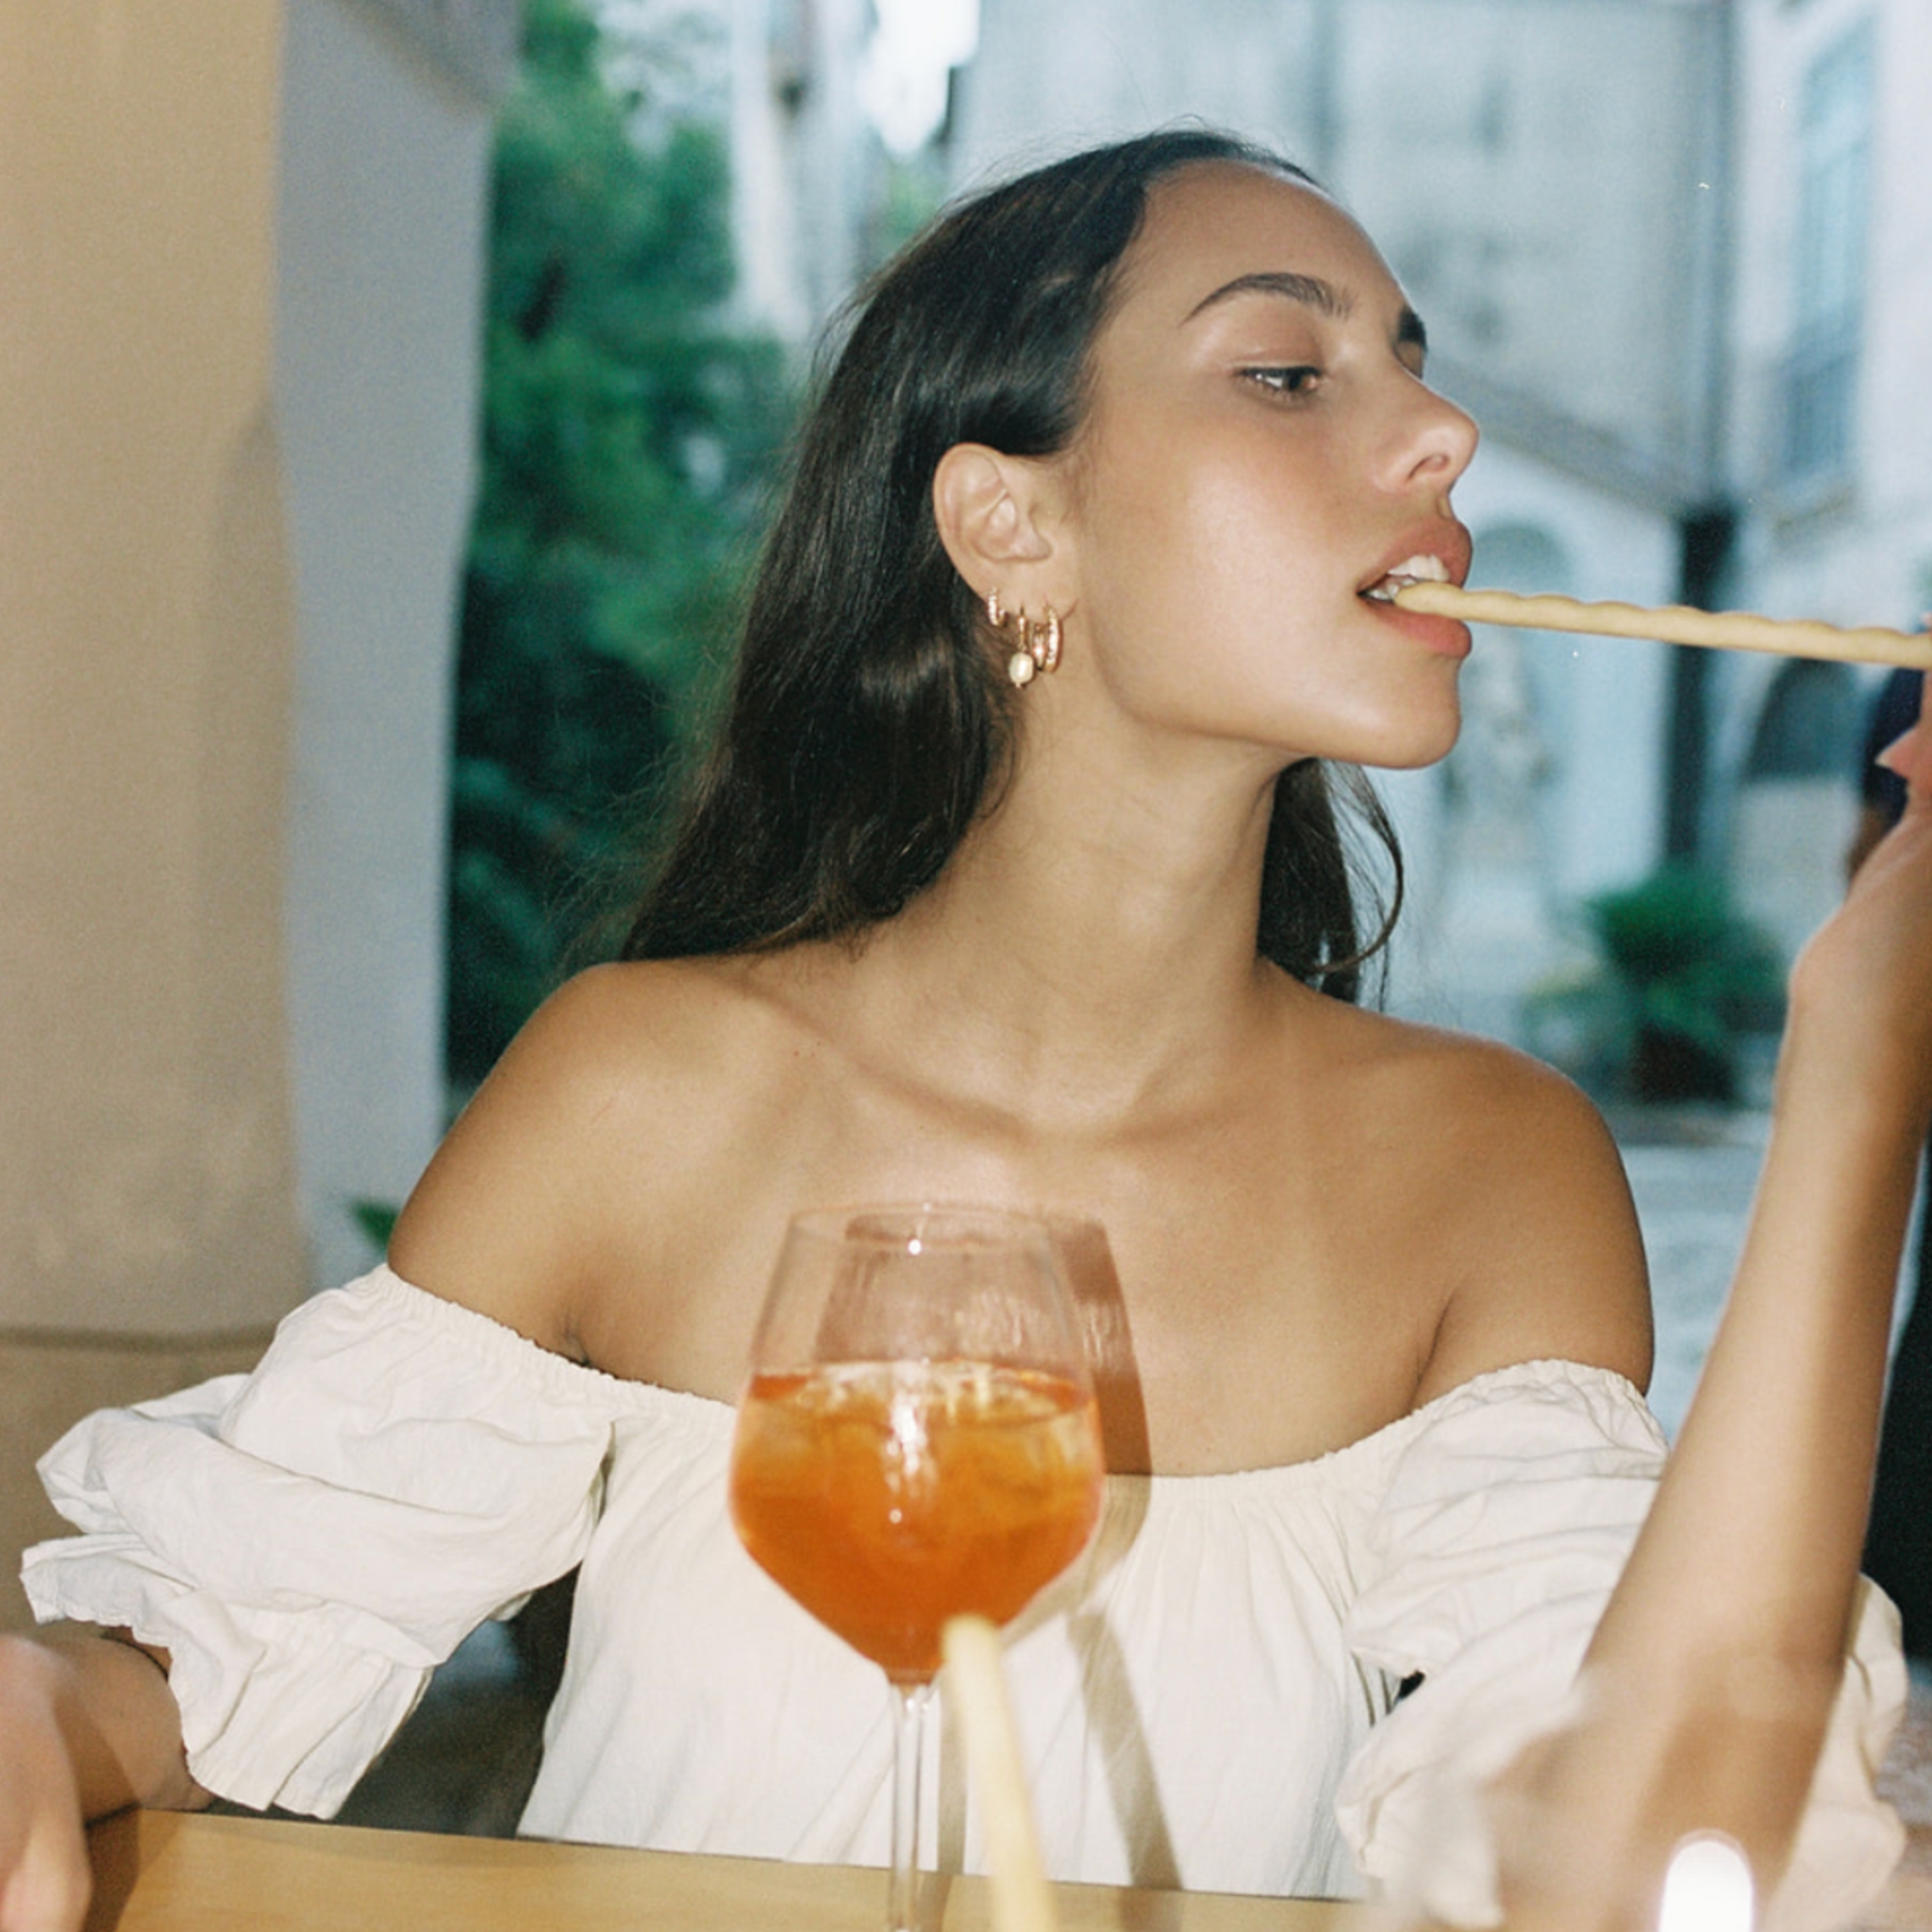 The model stretches to bite a rolled waffle snack, a cocktail before her, and a mini hoop and stud earring stack on her ear.